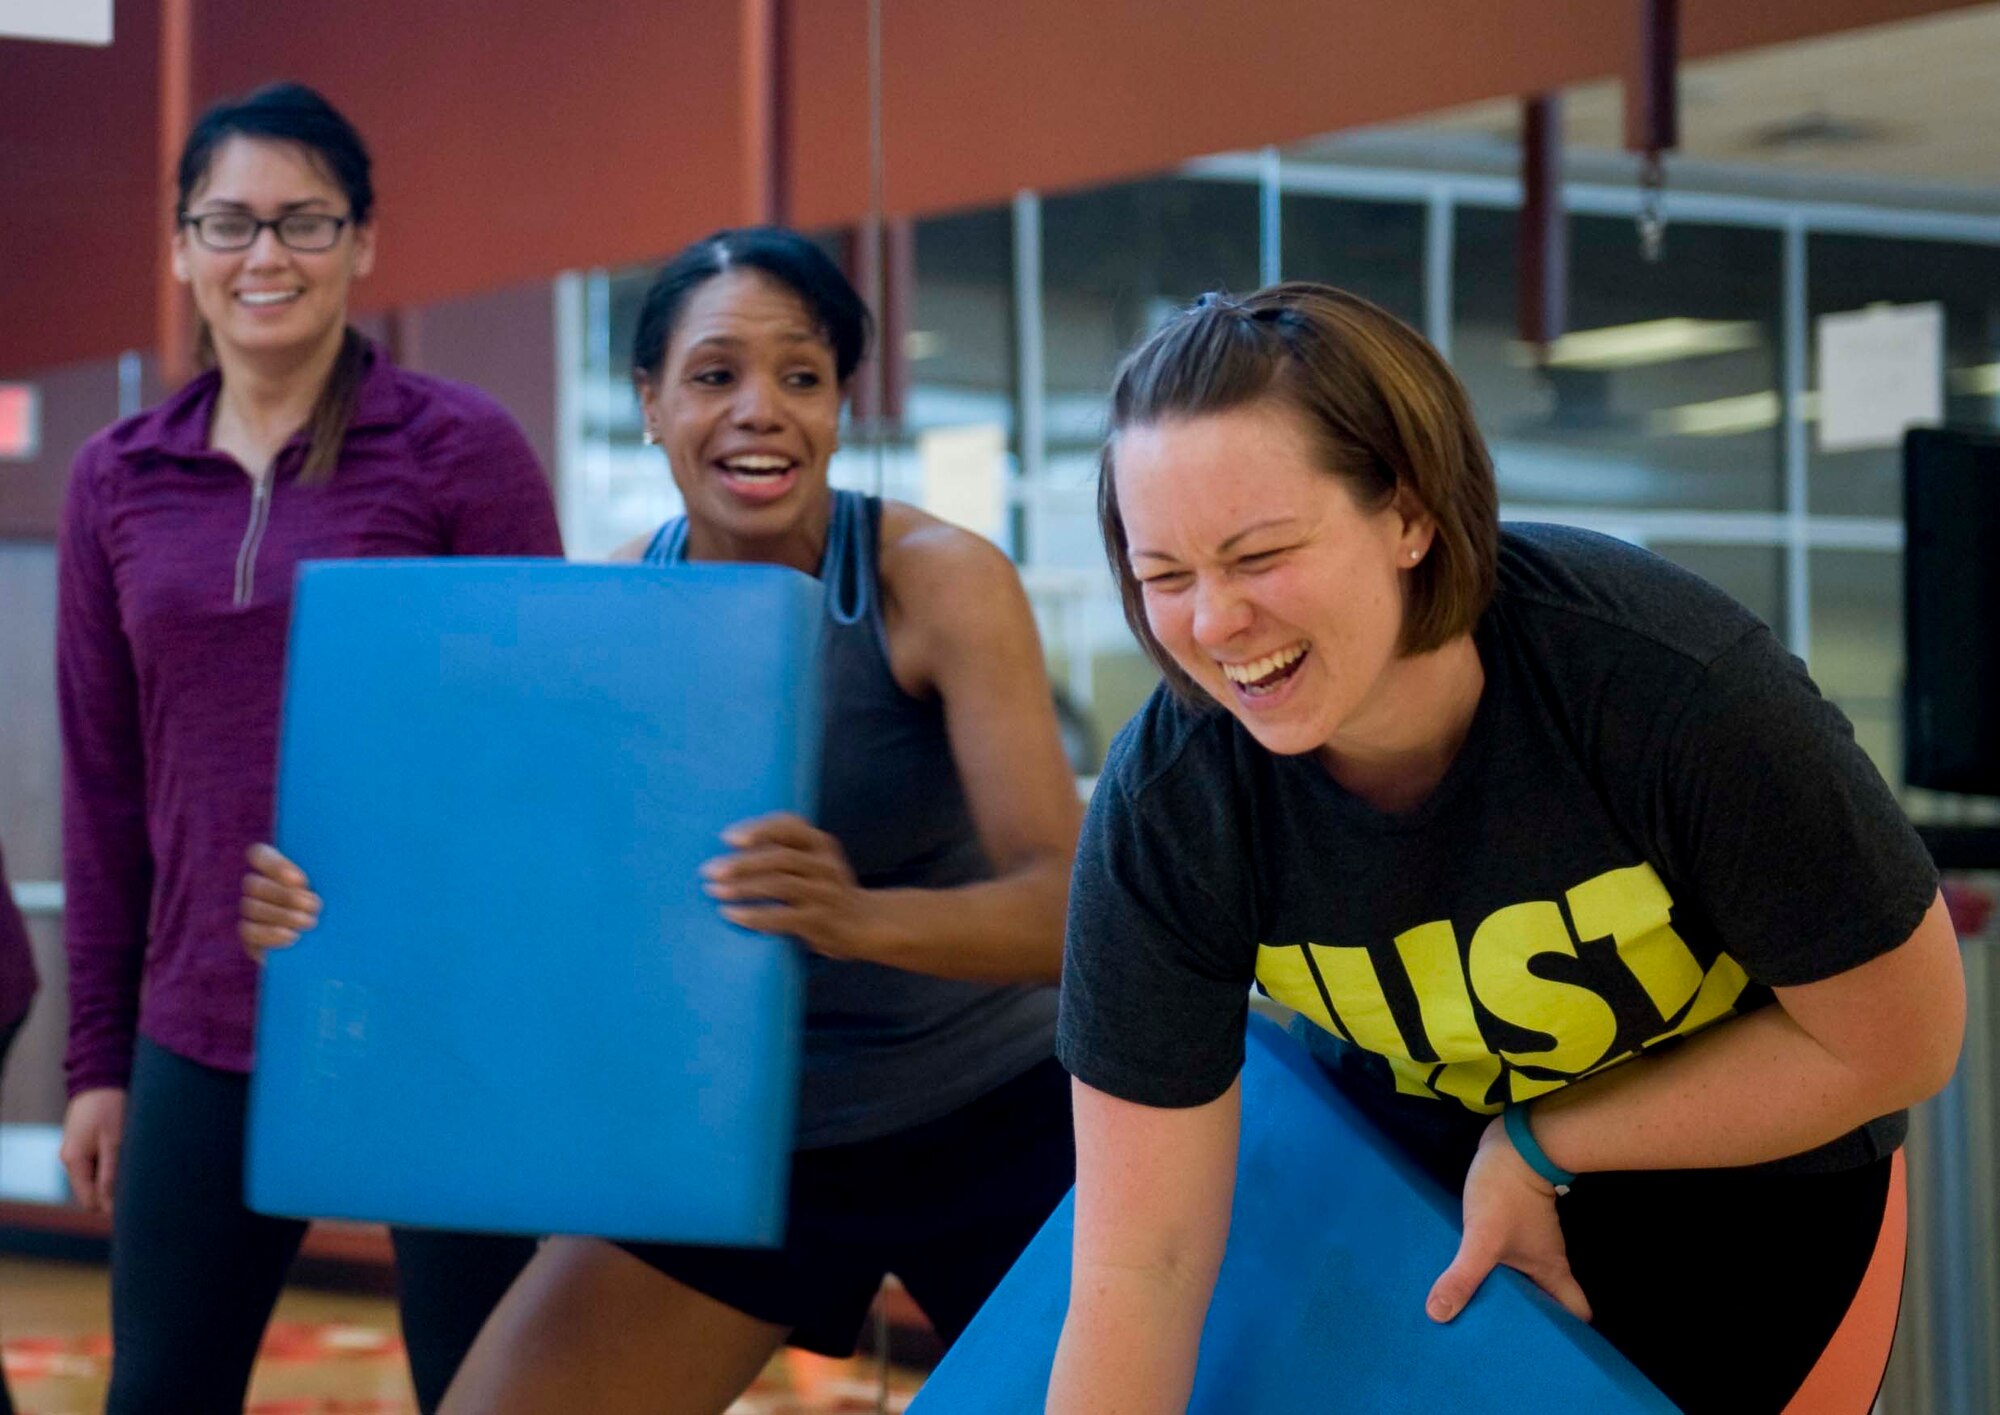 Tech. Sgt. Amanda Cook (right), 99th Civil Engineer Squadron unit training manager, has a laugh with Warrior Fitness Center  fitness instructor, Nikki Harris (center) as they perform punches during a Warrior Challenge Soar into Shape class at the fitness center on Nellis Air Force Base, Nev., Feb. 25, 2015. Harris has adopted a boisterous teaching style of which inspires those she teaches to do their very best. (U.S. Air Force photo by Airman 1st Class Rachel Loftis)